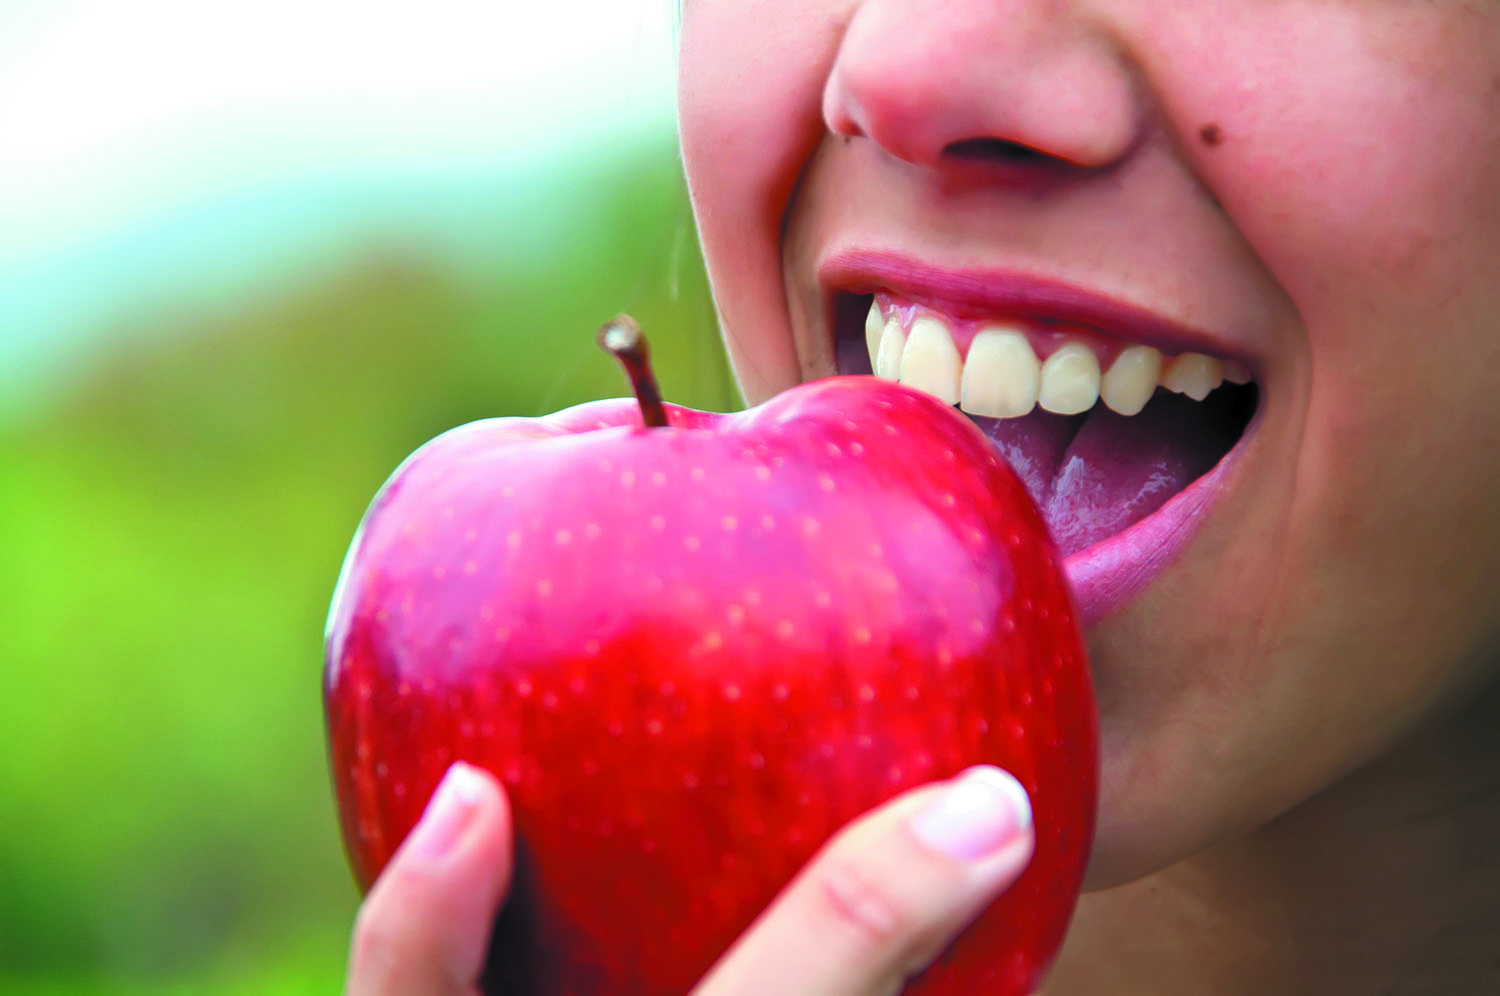 Benefits of eating apple: 99% of people do not know about these benefits.